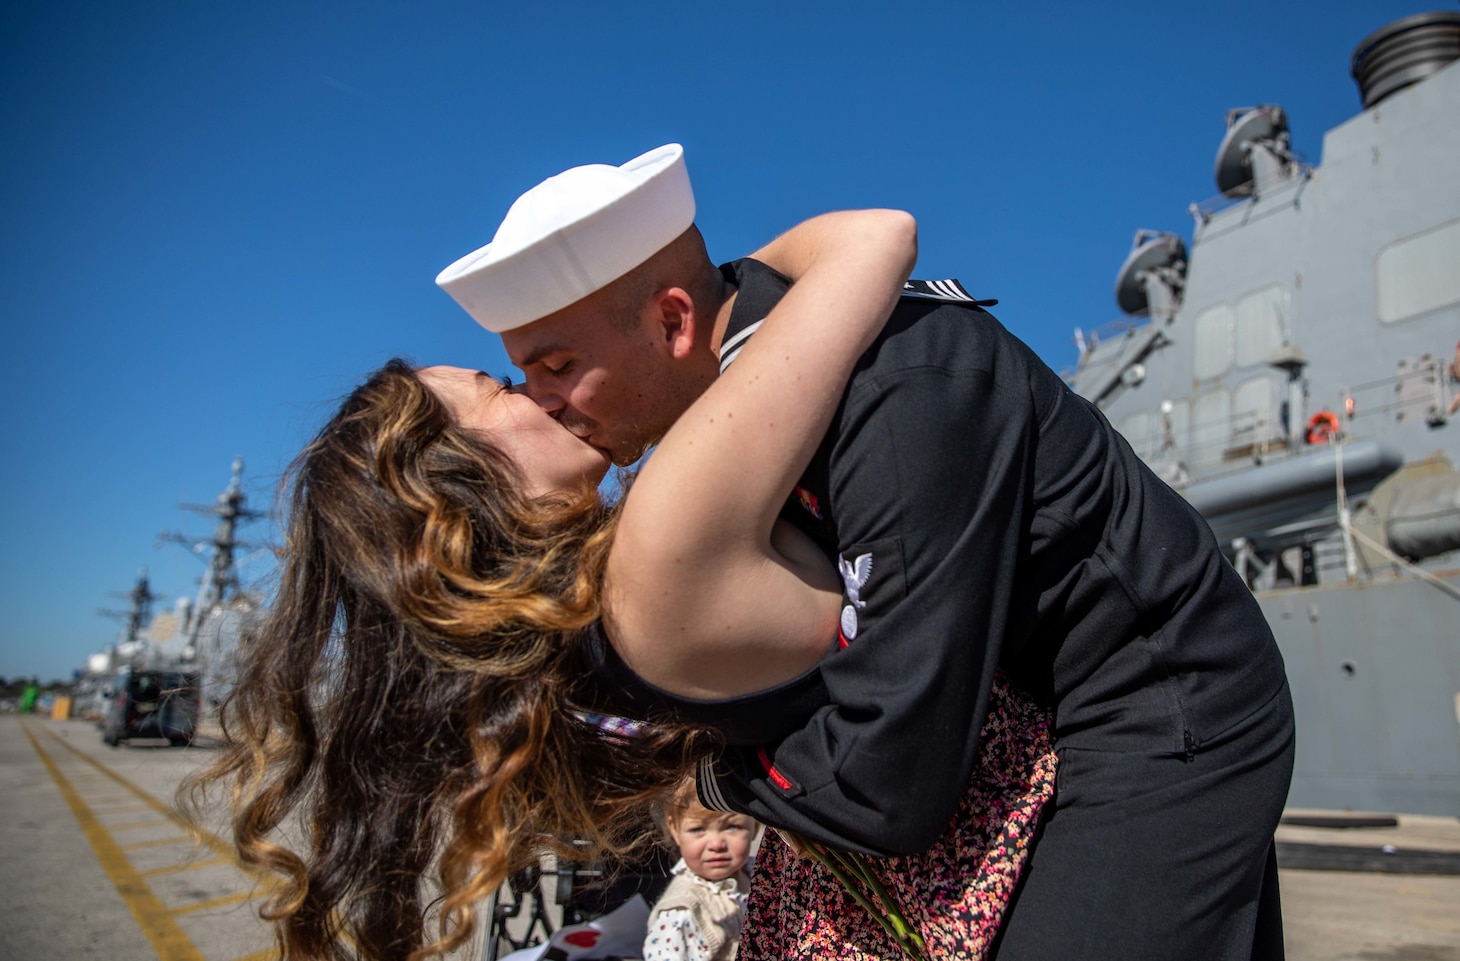 Electrician’s Mate 3rd Class Adam Fisher, right, greets his spouse with the traditional first kiss after returning from patrol aboard the Arleigh Burke-class guided-missile destroyer USS Roosevelt (DDG 80), Feb. 4, 2023.